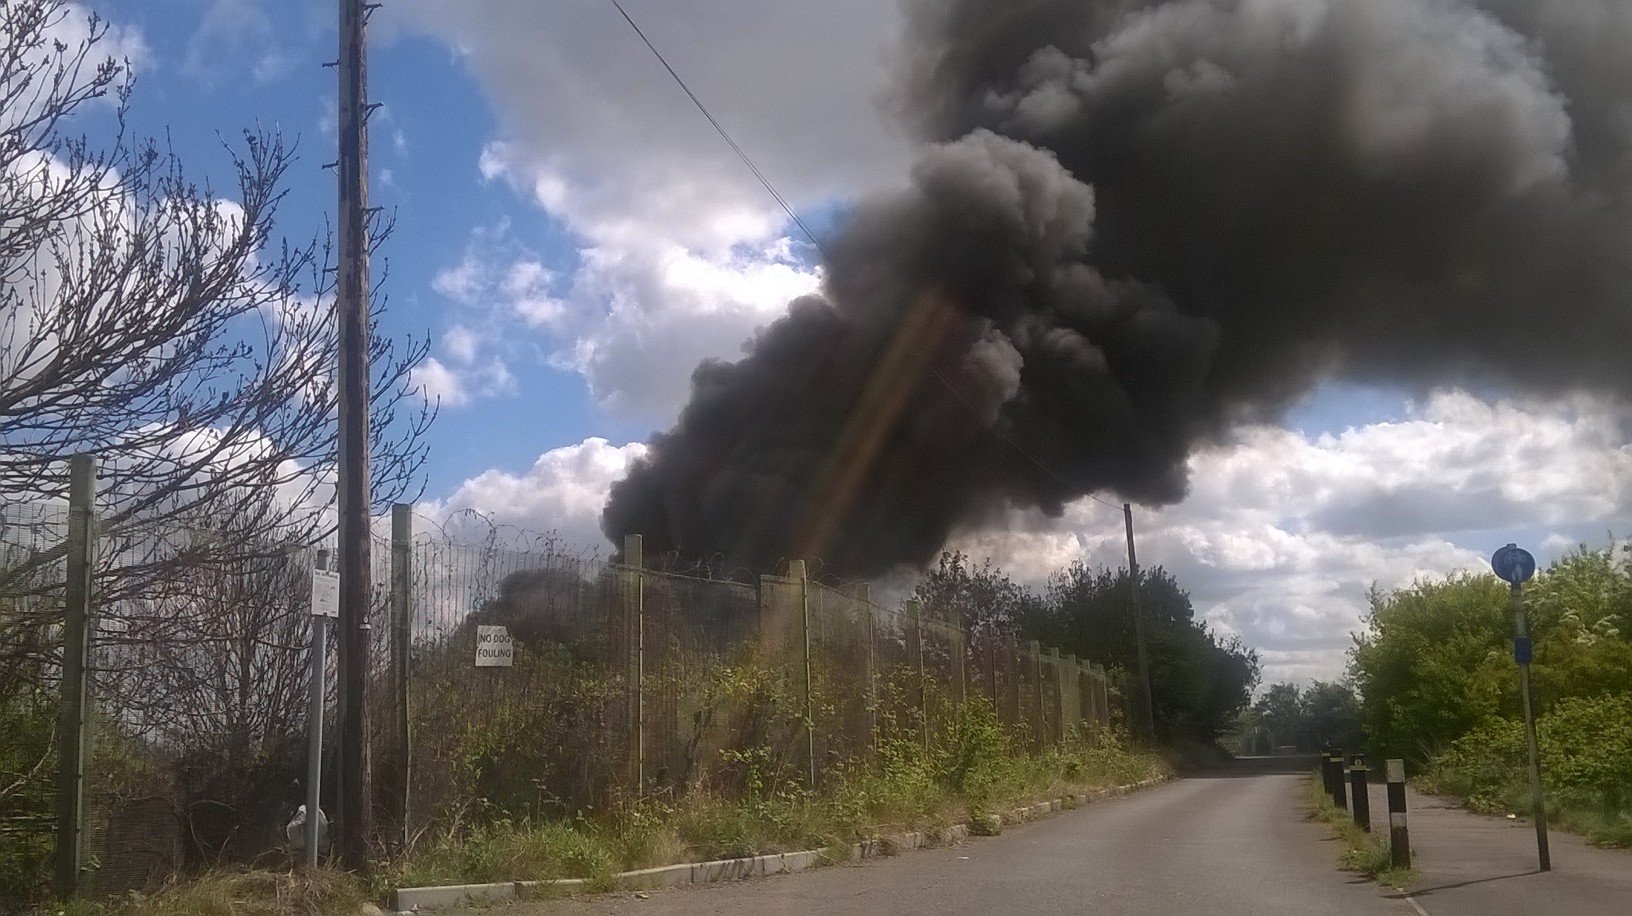 Massive pile of rubbish, derelict boats and gas cylinders on fire in Erith